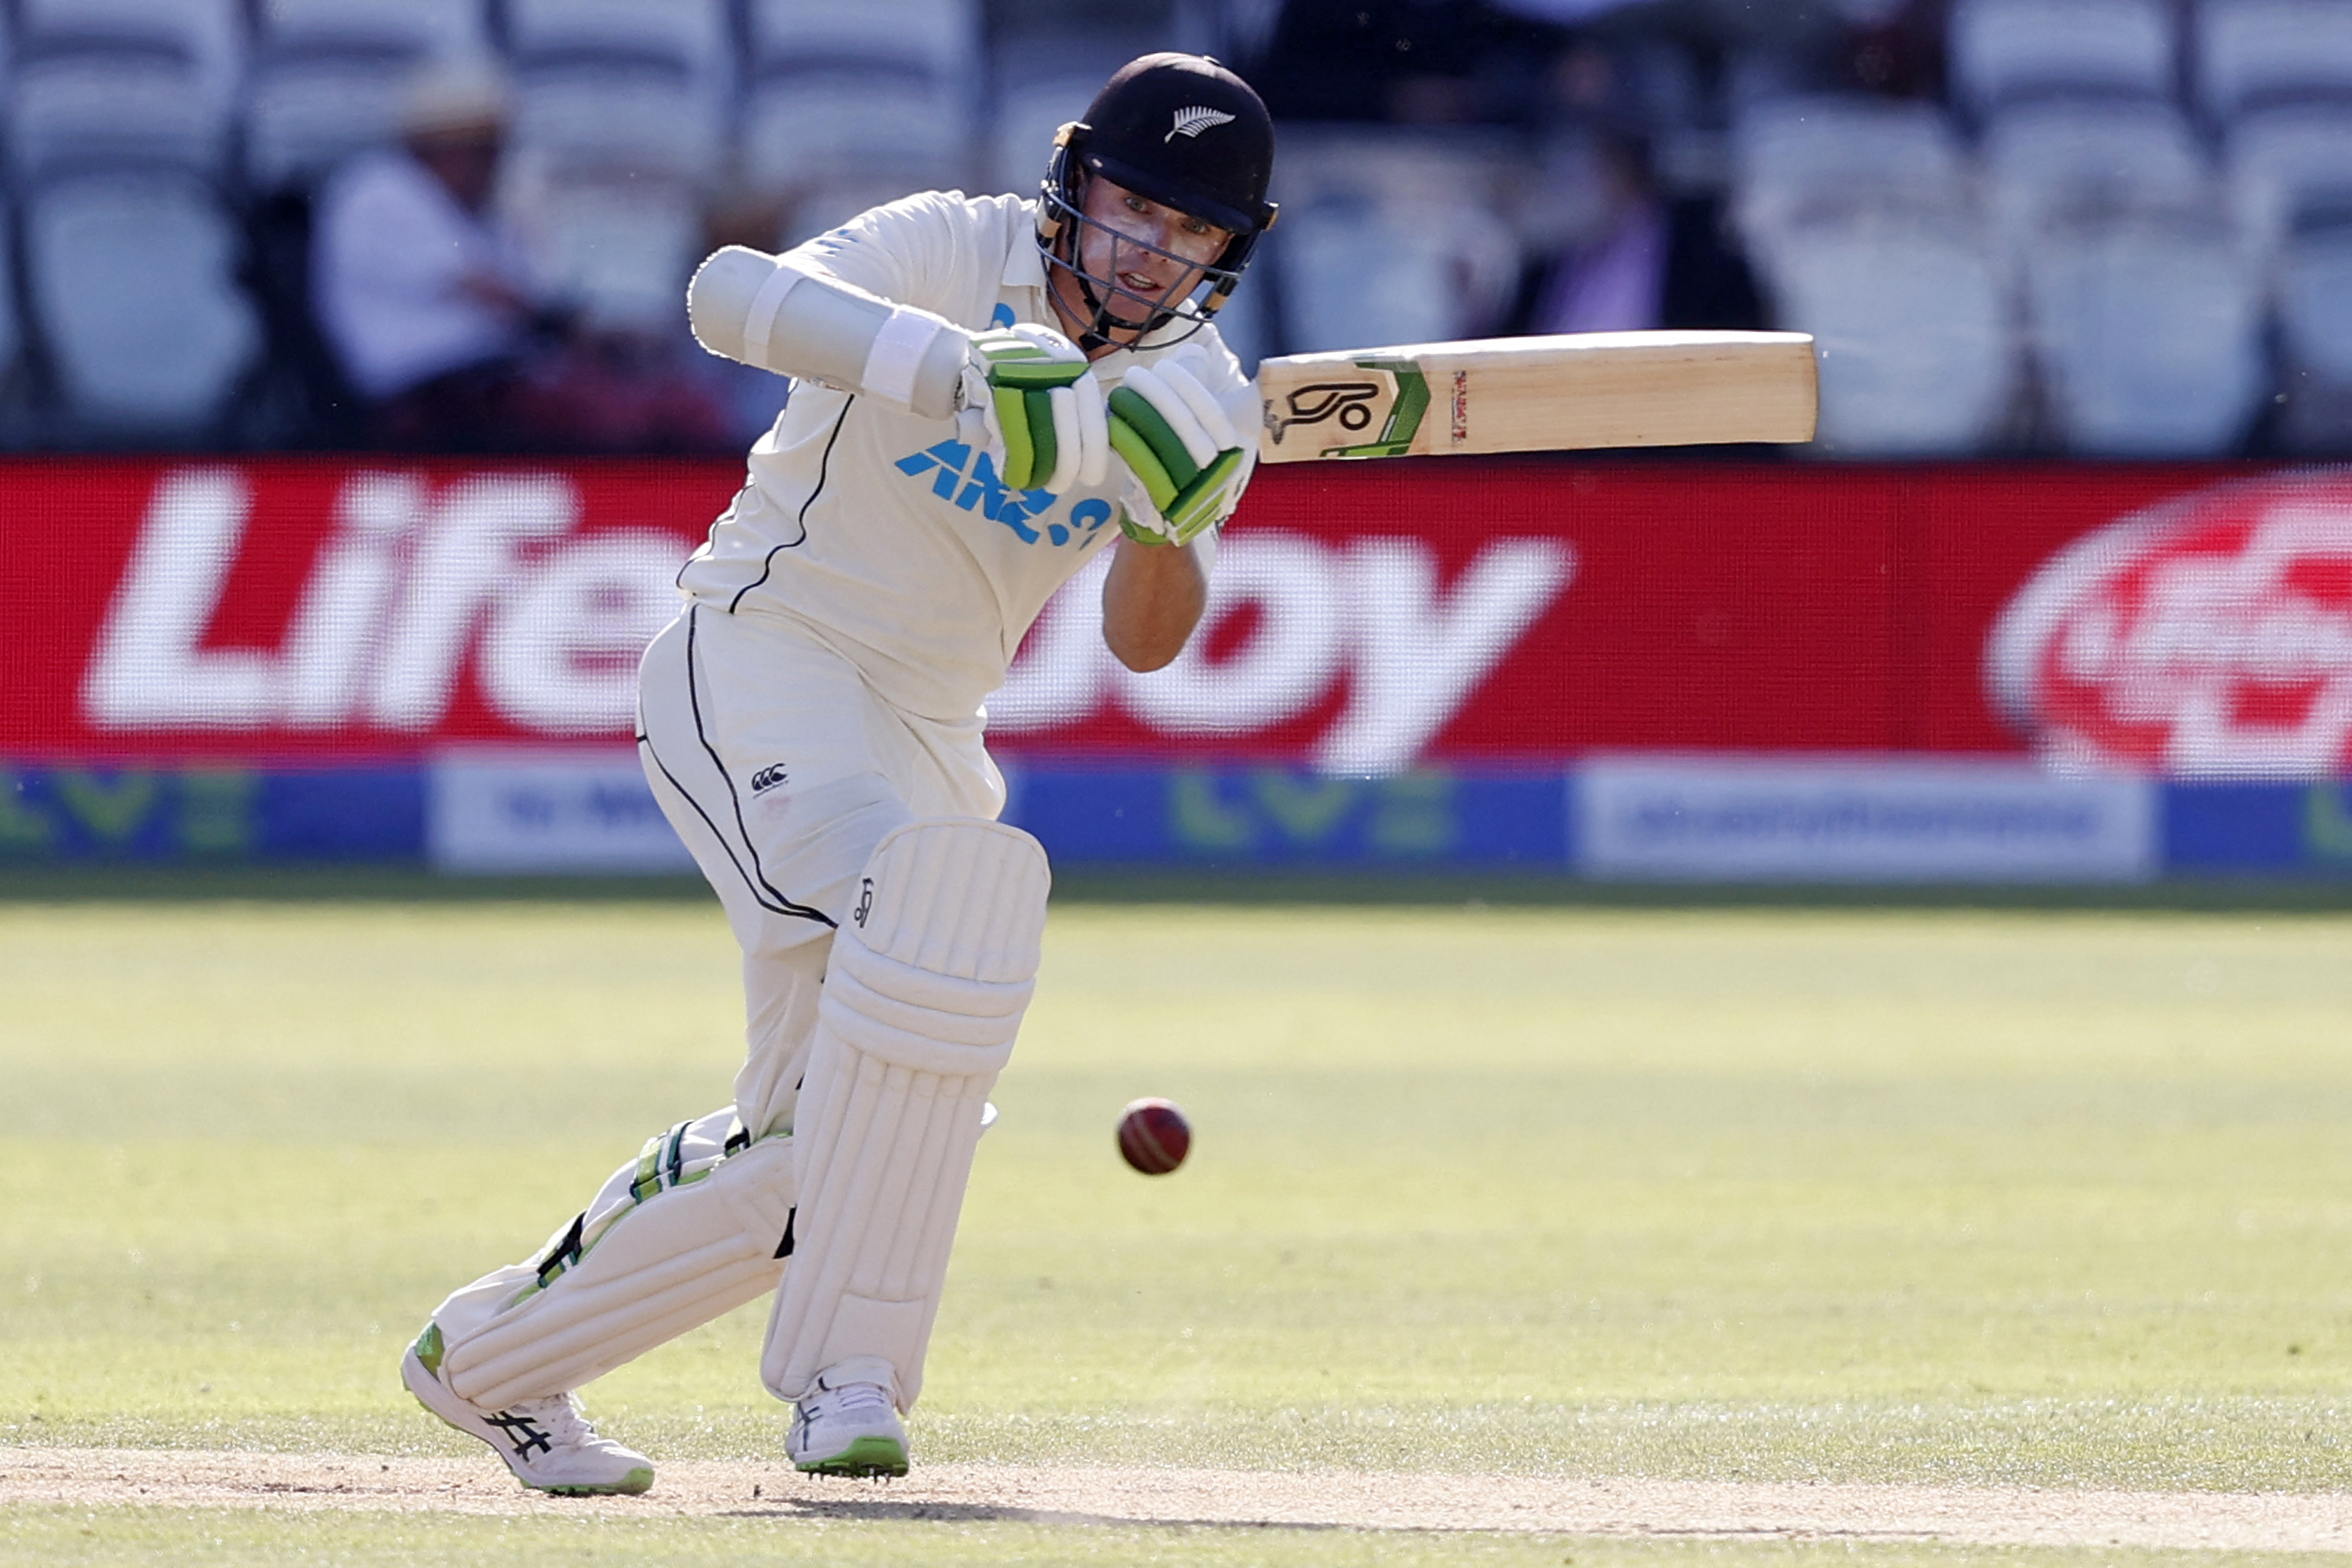 NZ vs BAN | Honoured to captain New Zealand, will look to grow as a leader, says Tom Latham